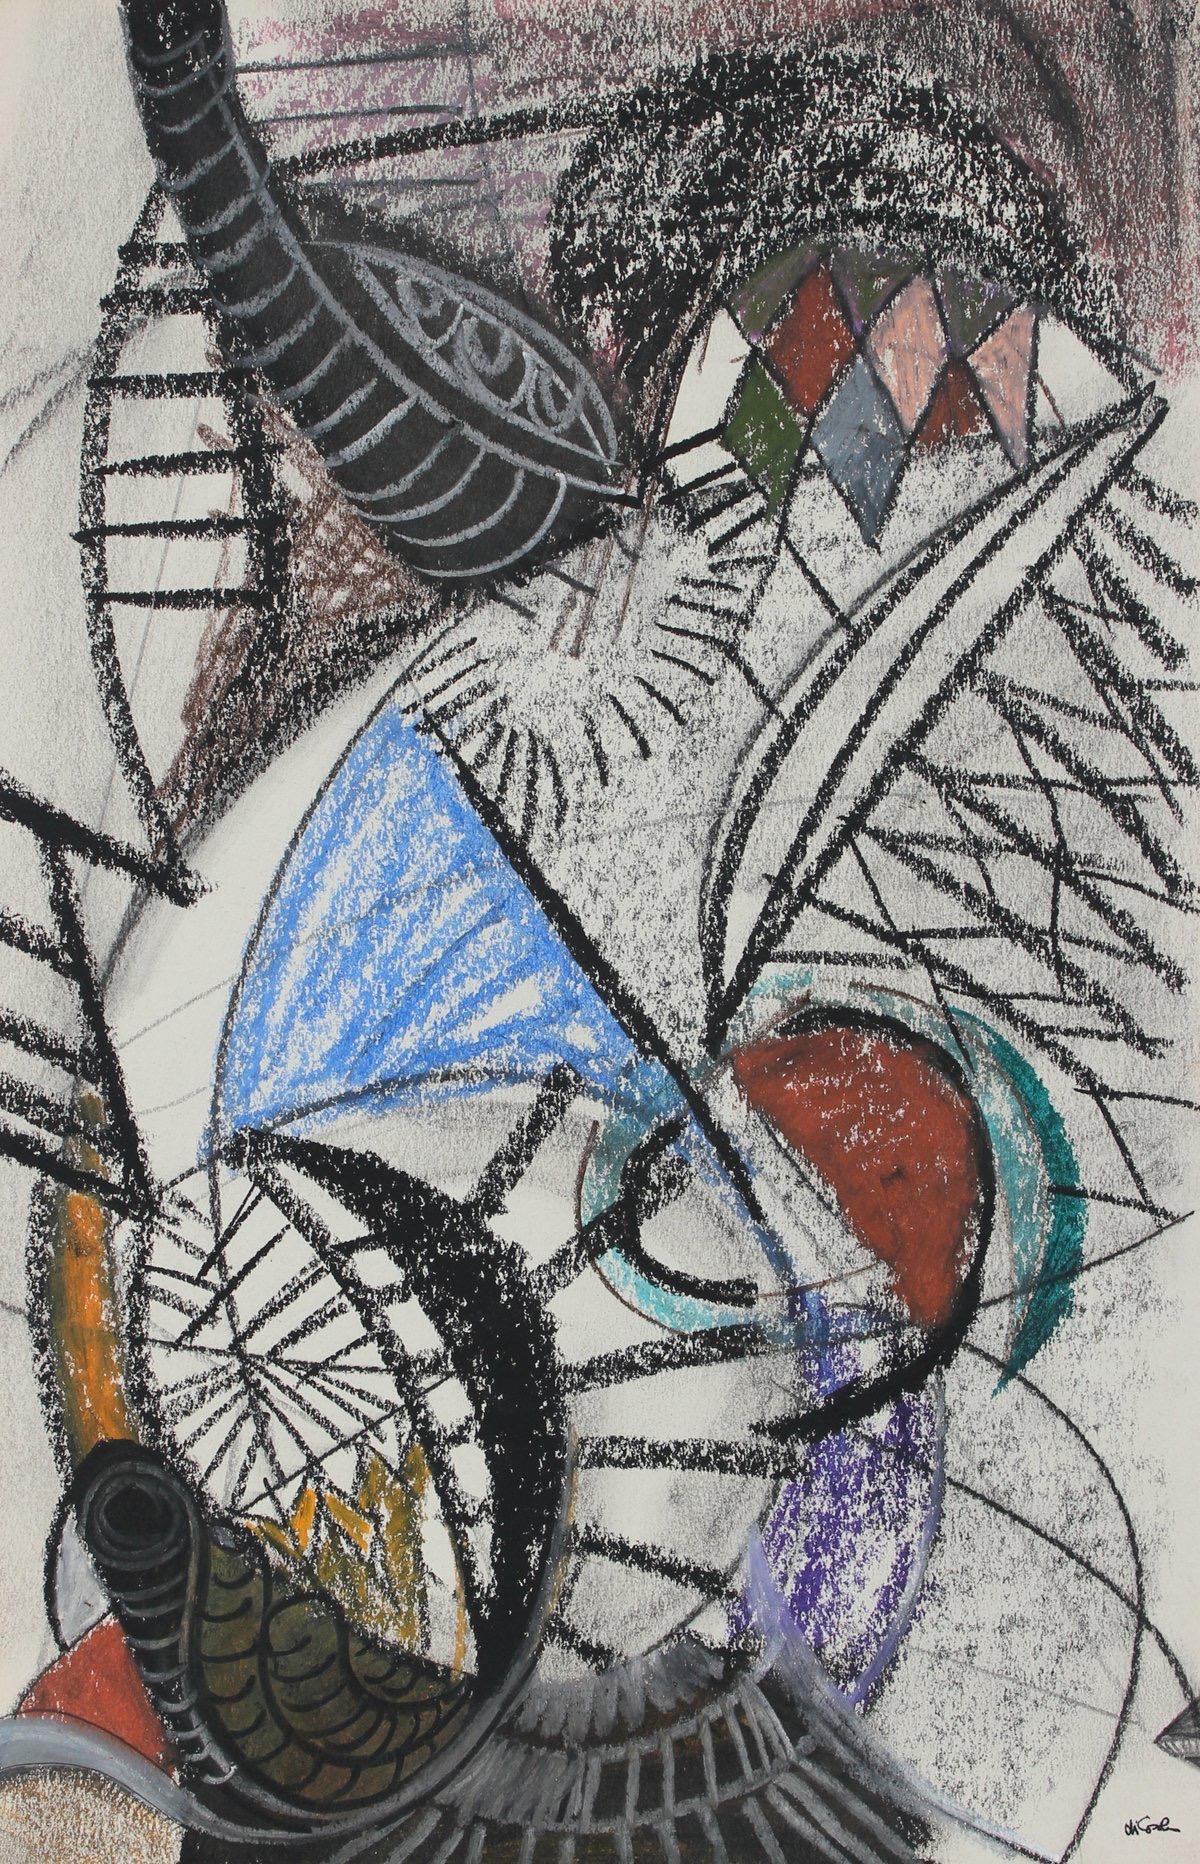 Michael di Cosola Abstract Drawing - Moody Geometric Abstract Mid-Late 20th Century Graphite, Charcoal, and Pastel